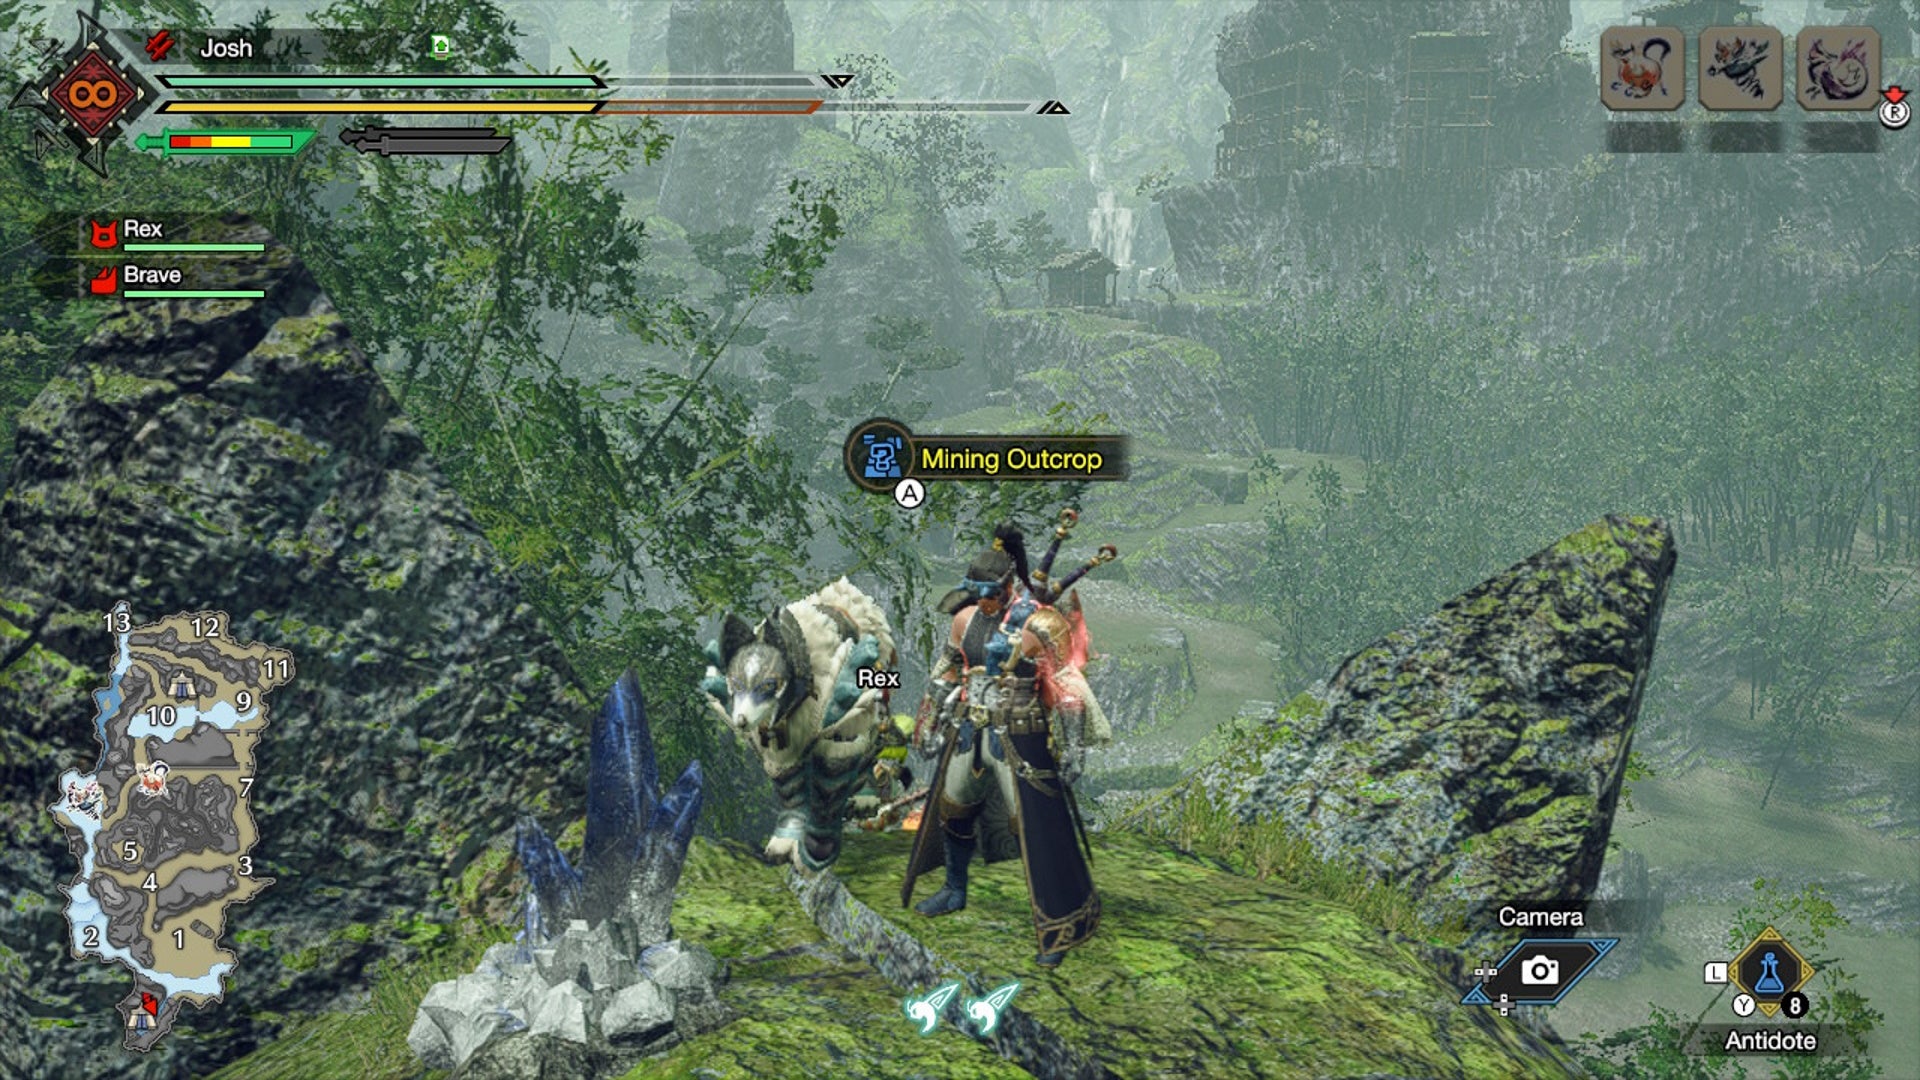 A hunter, palico, and palamute stand near a mining outcrop on a grass-covered hill